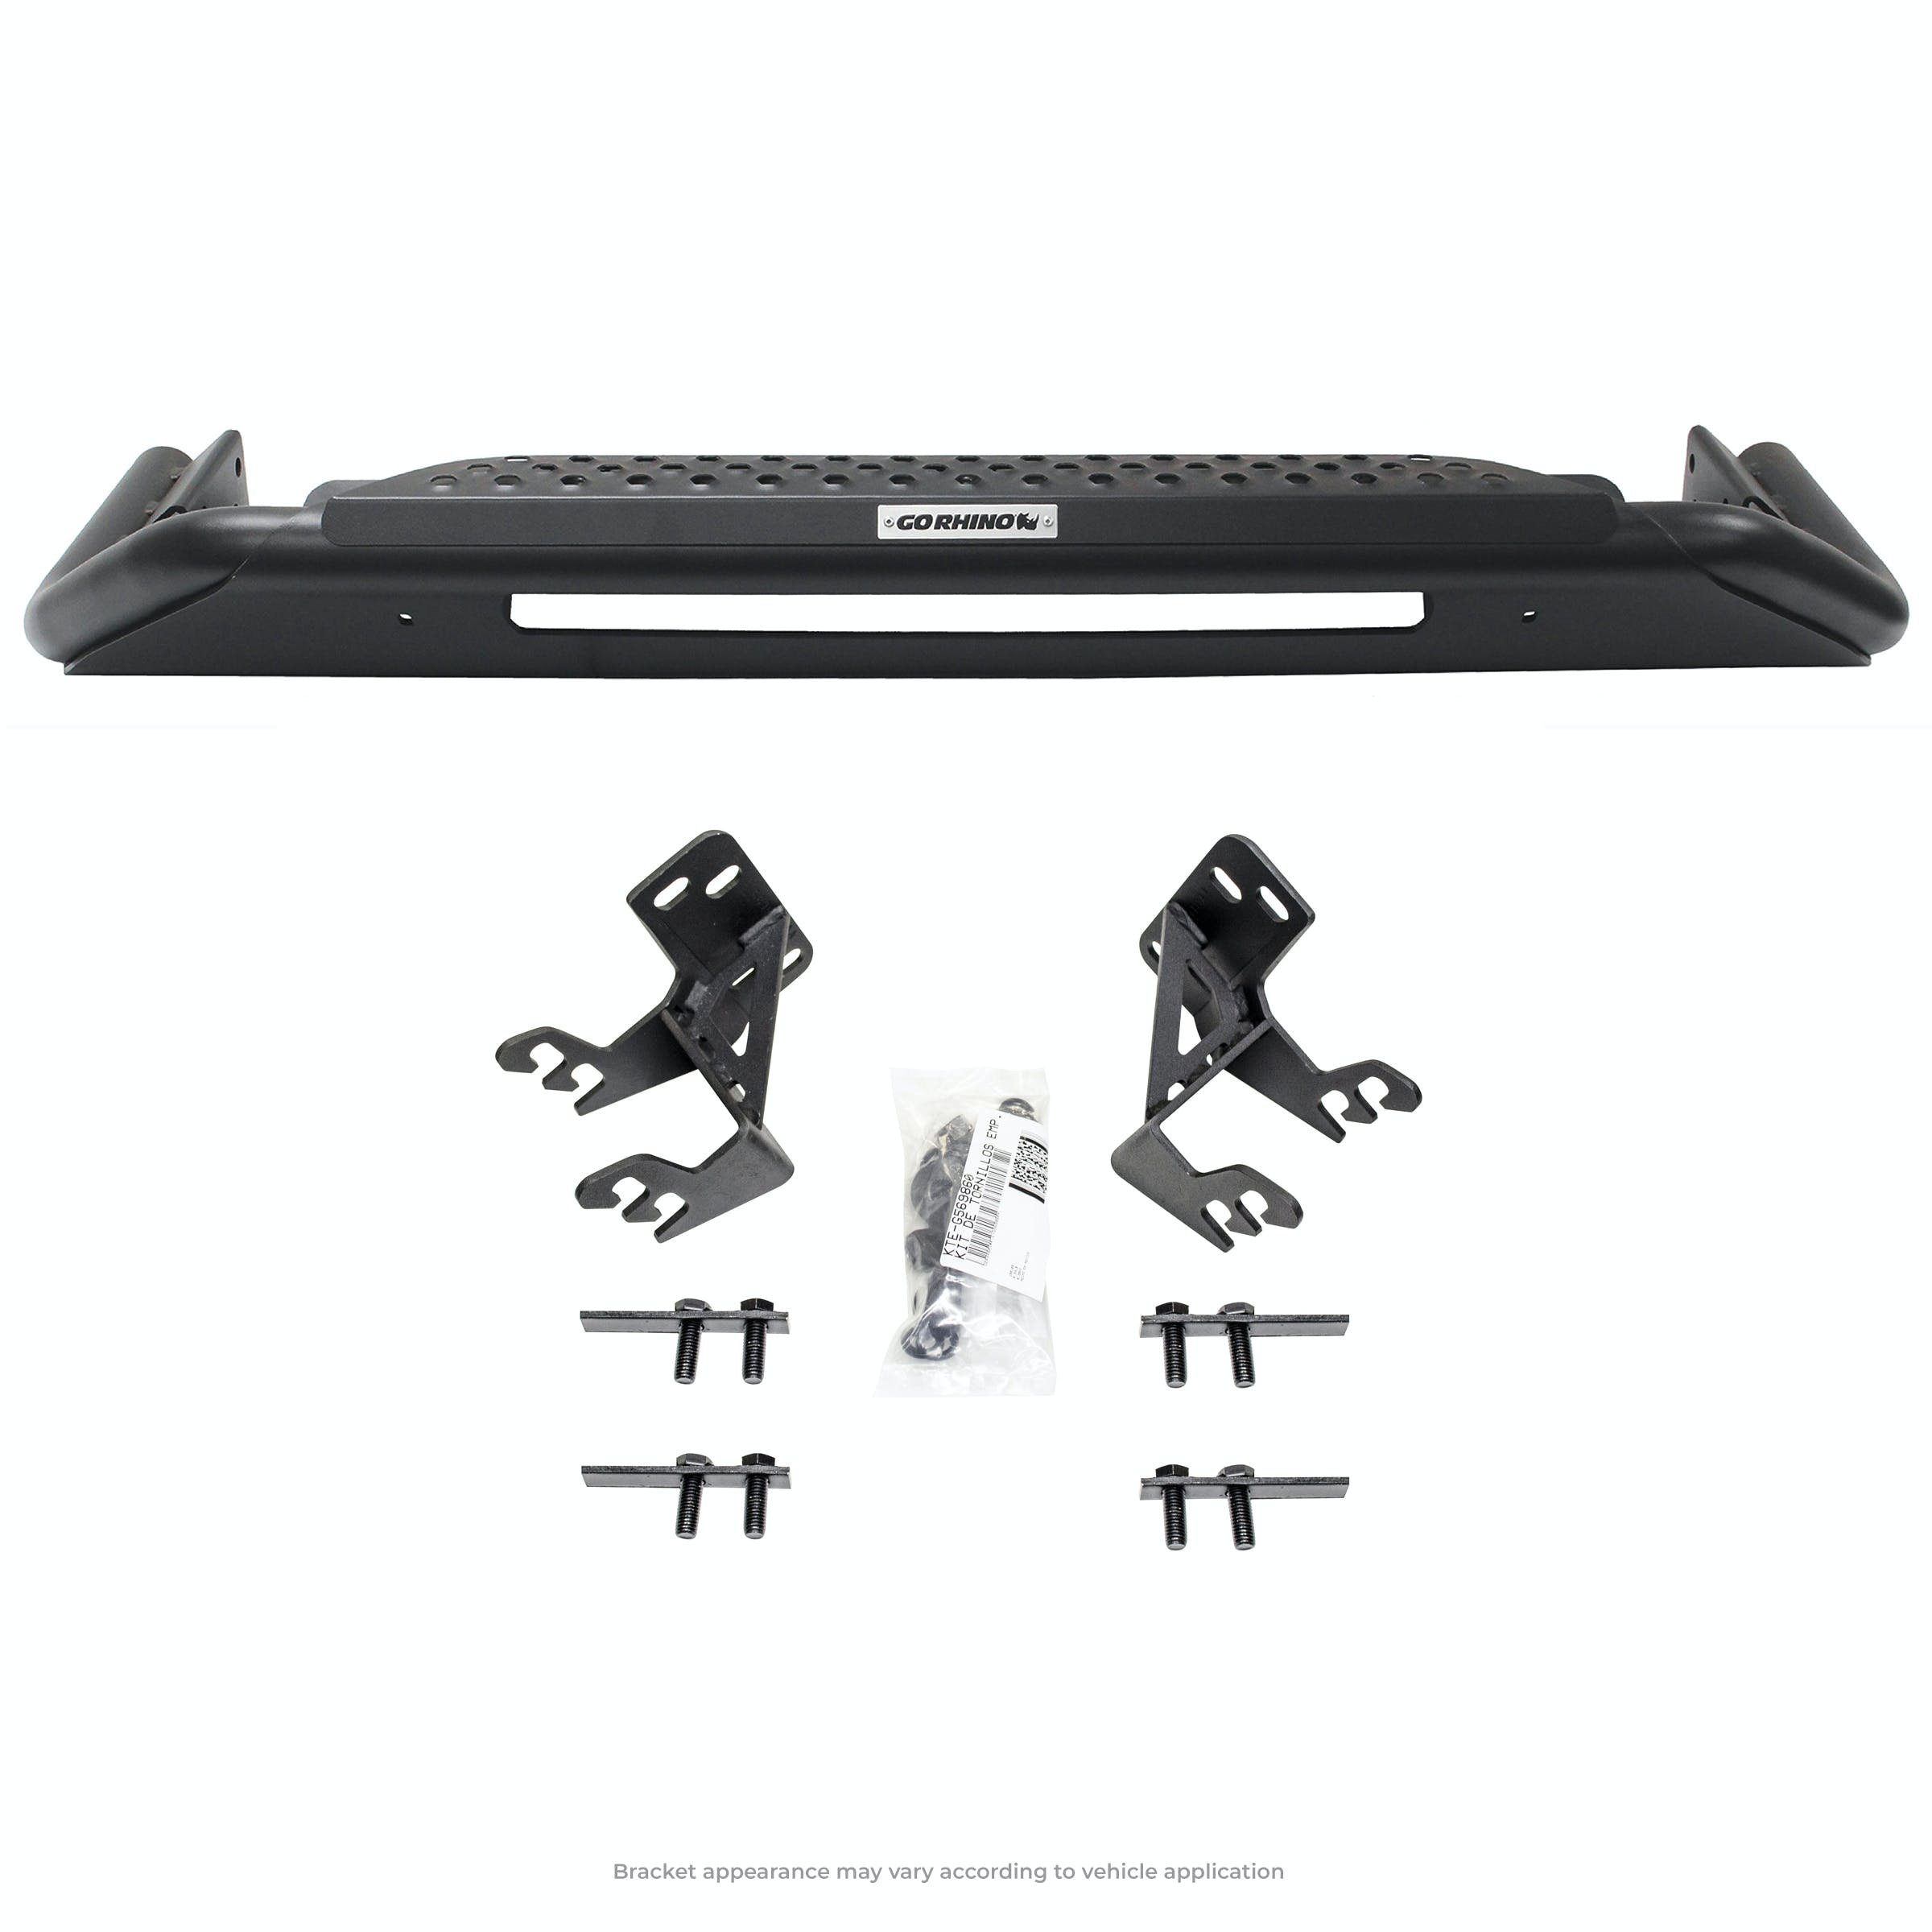 Go Rhino 566560T RC3 LR - Complete kit: Front guard + Brackets